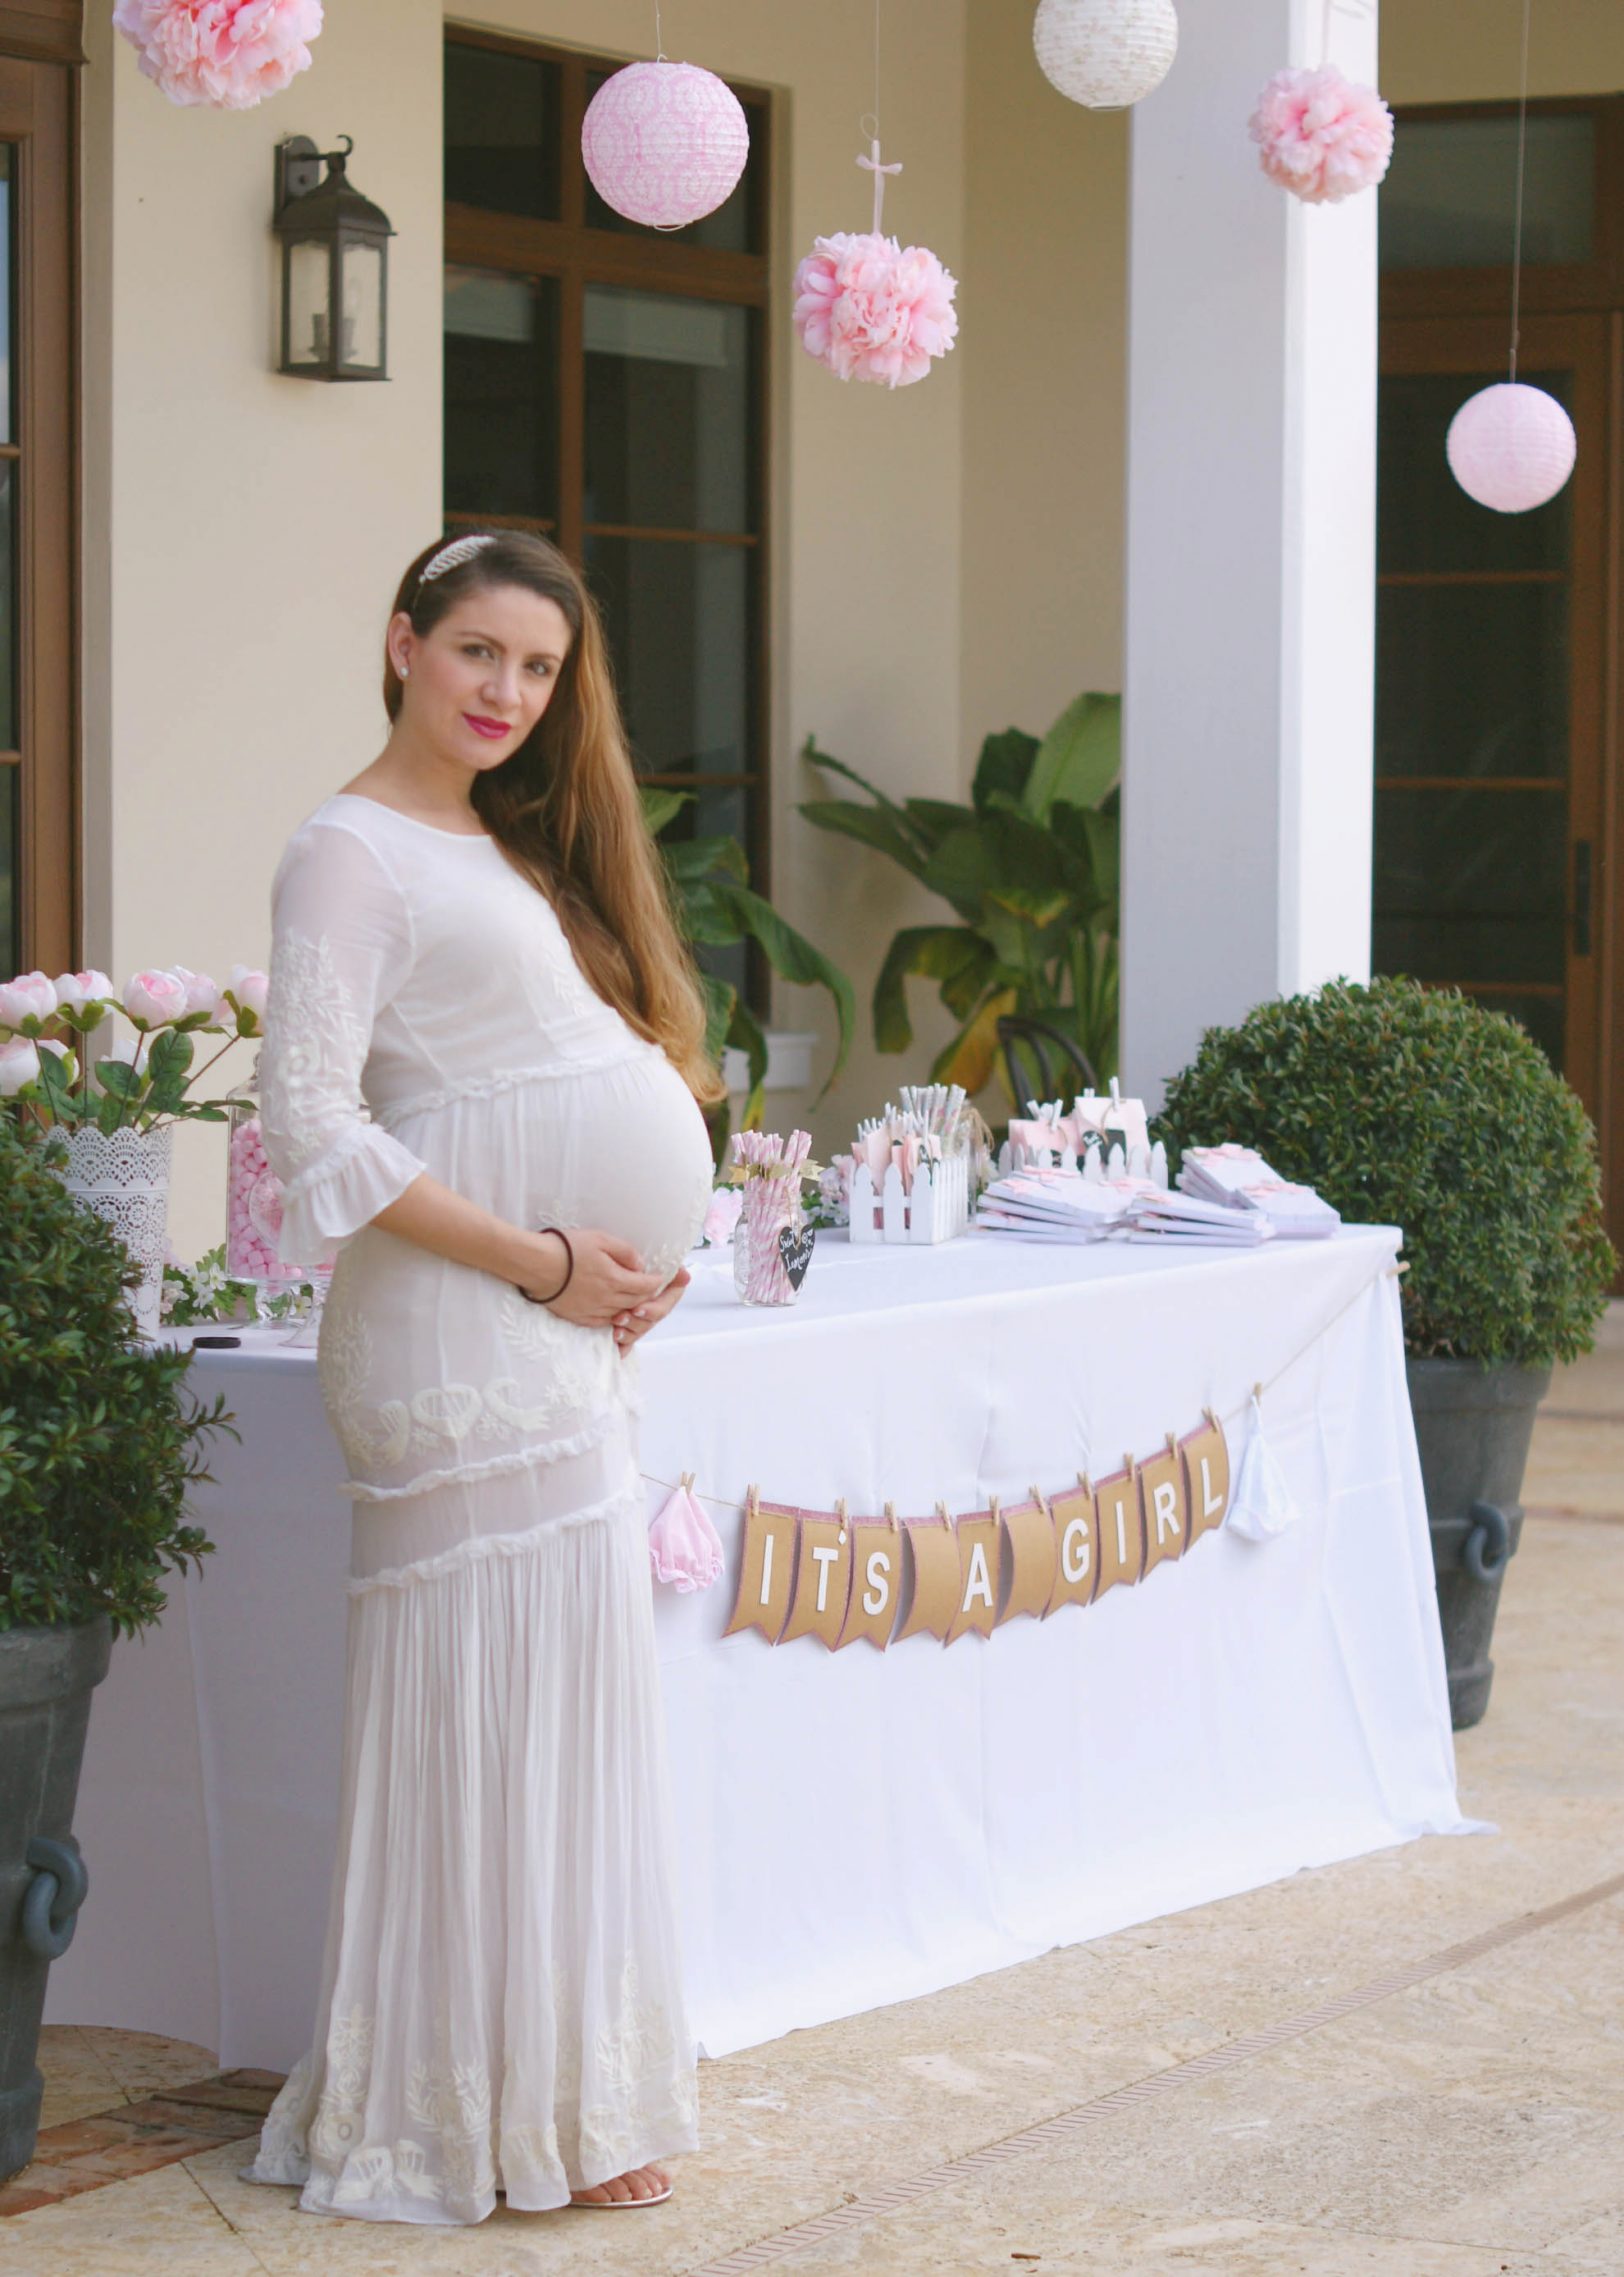 Full Size of Baby Shower:baby Shower Dresses Indian Maternity Maxi Dress Cheap Maternity Dresses For Baby Showers Trendy Maternity Clothes Maternity Blouses For Baby Shower Plus Size Maternity Dresses For Baby Shower What Should I Wear To My Baby Shower Plus Size Maternity Clothes